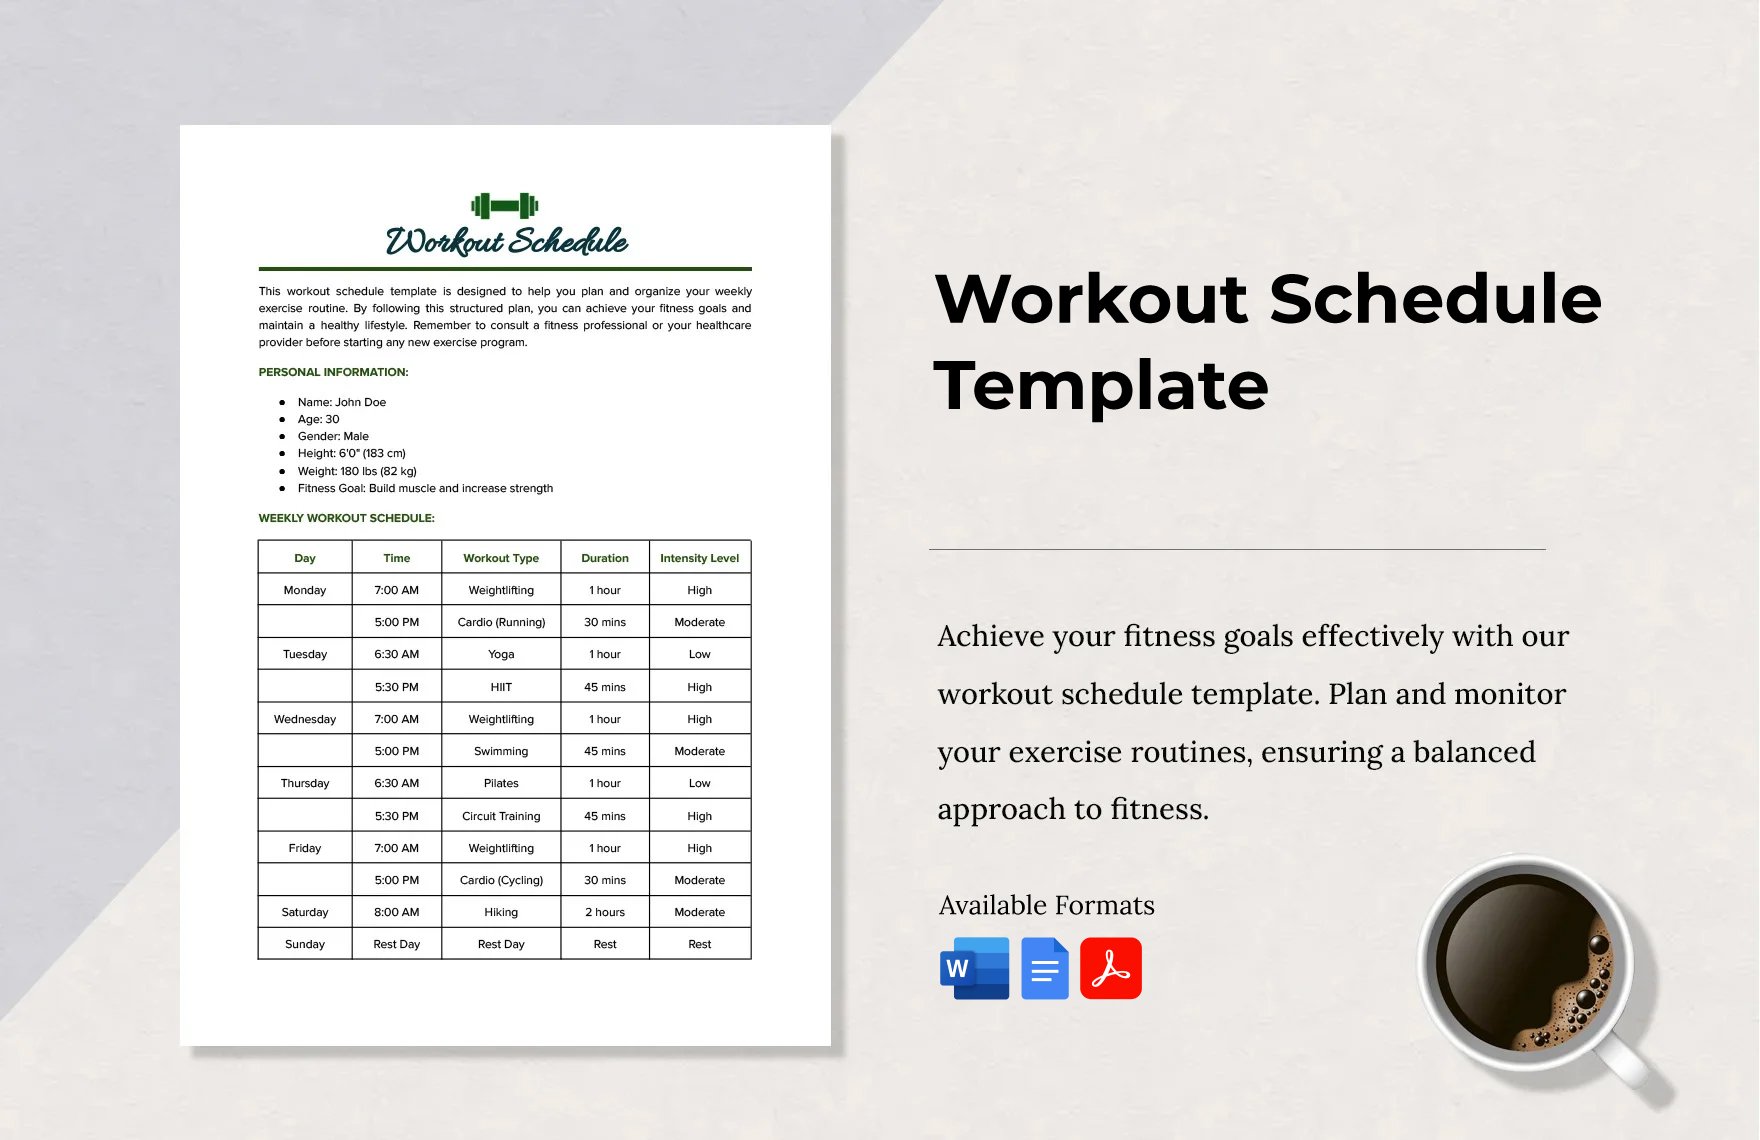 Free Workout Schedule Template in Word, Google Docs, PDF